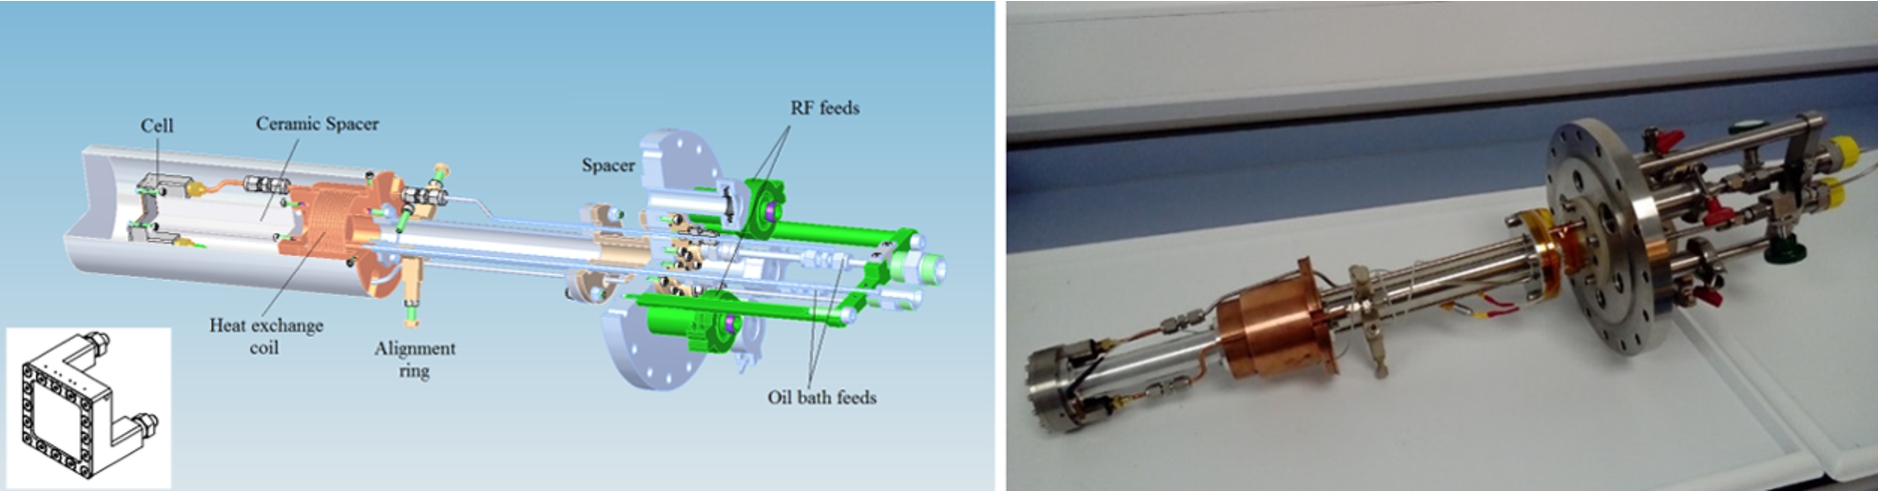 (left) A CAD view of the chemistry insert, showing internal components, and (right) the completed system with the metal cell attached.